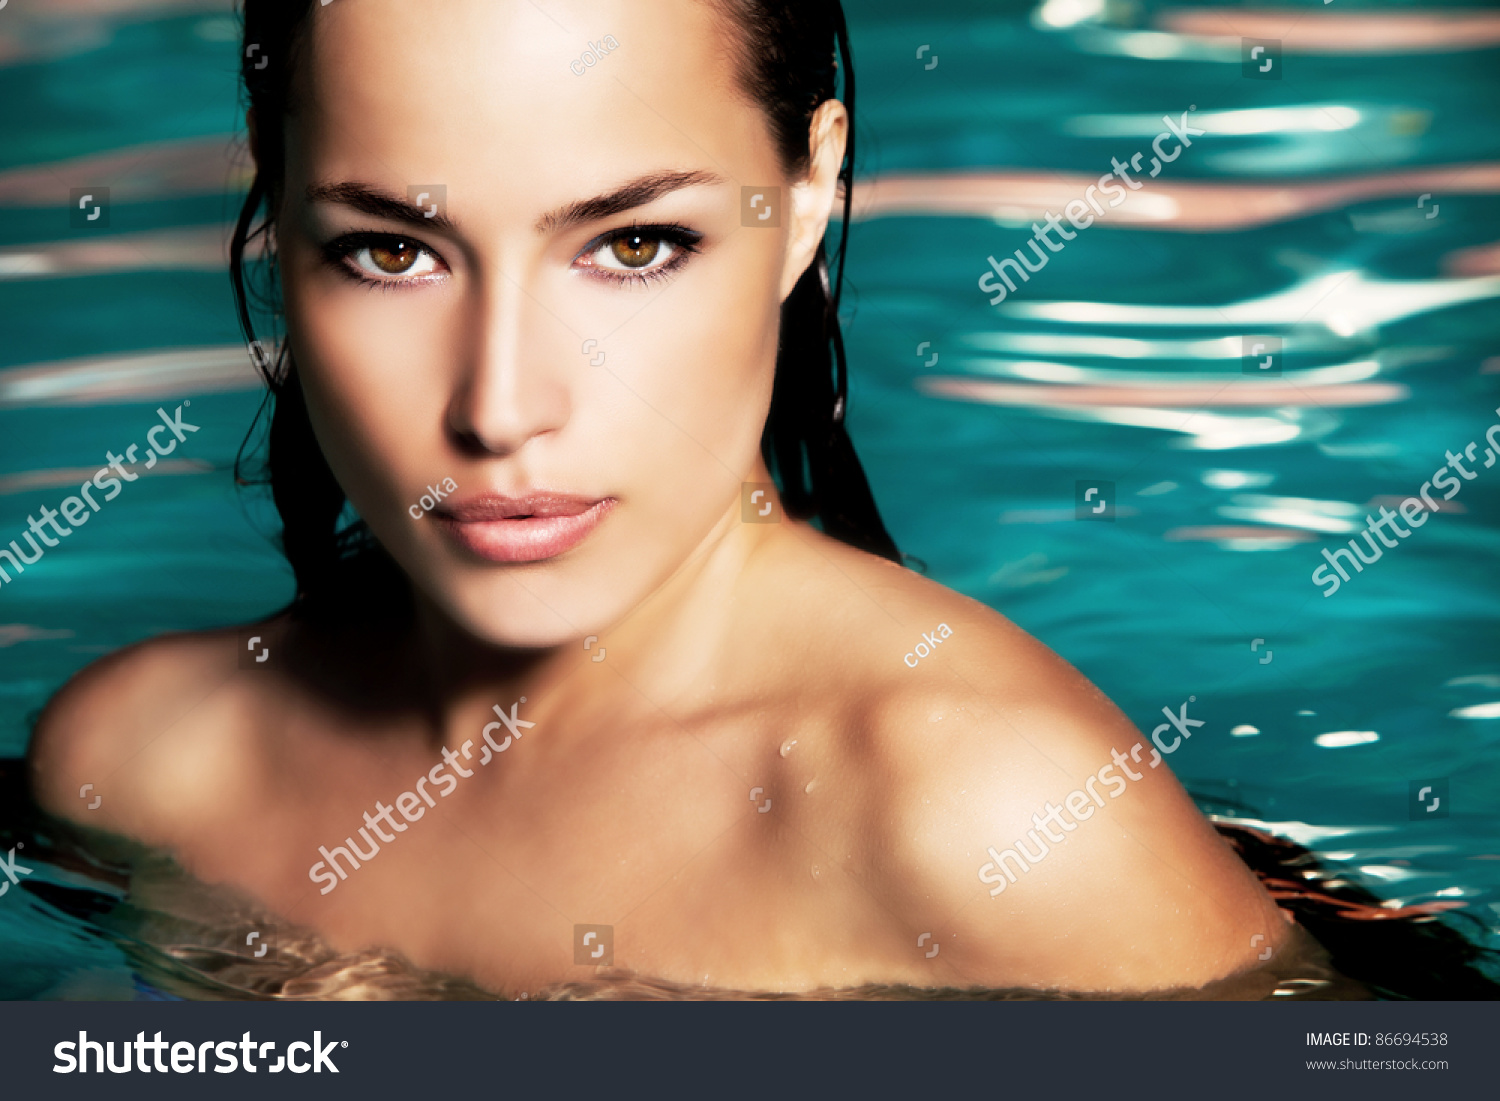 Reflections The Most Beautiful Woman 95